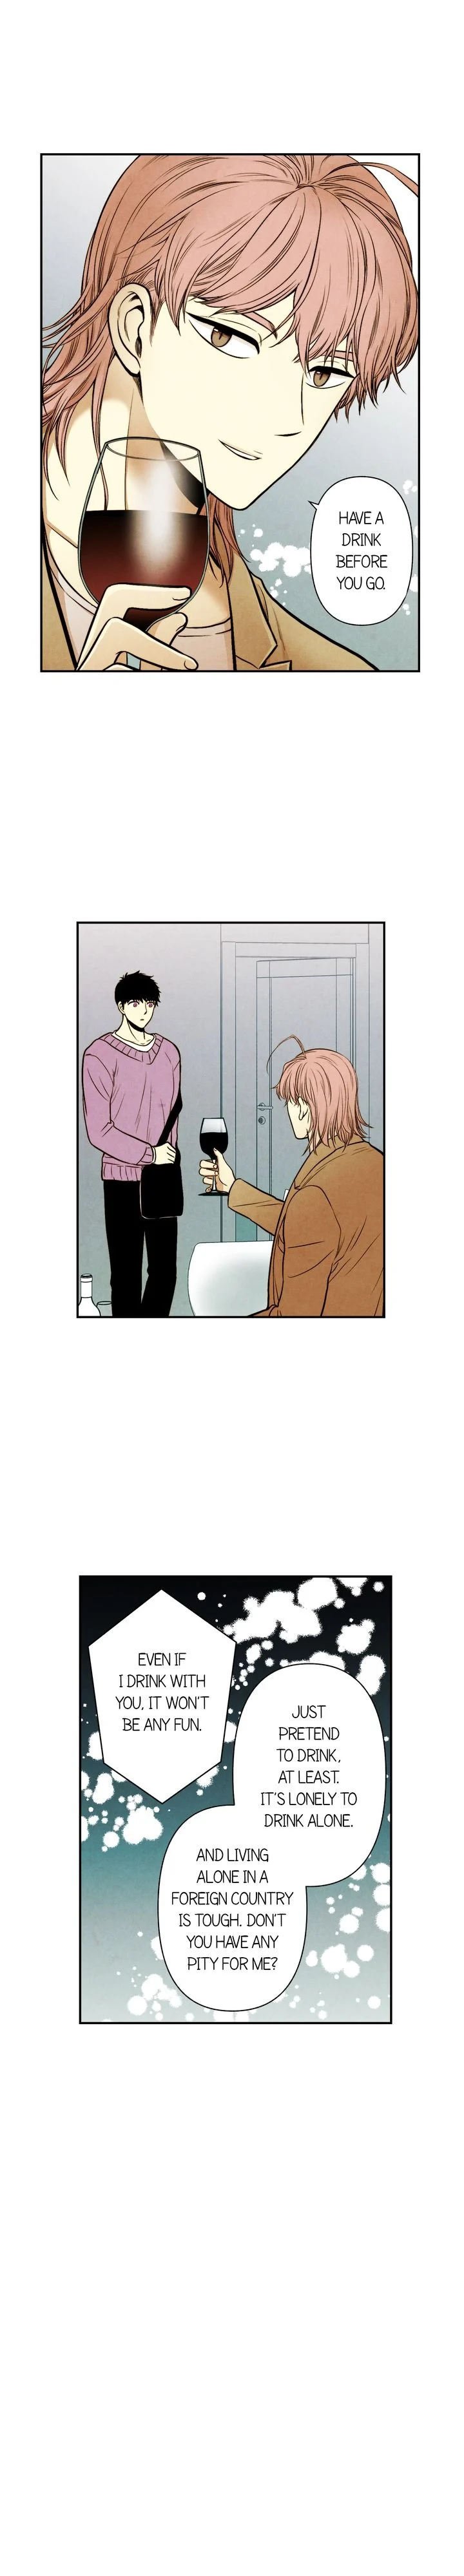 just-give-it-to-me-chap-33-5